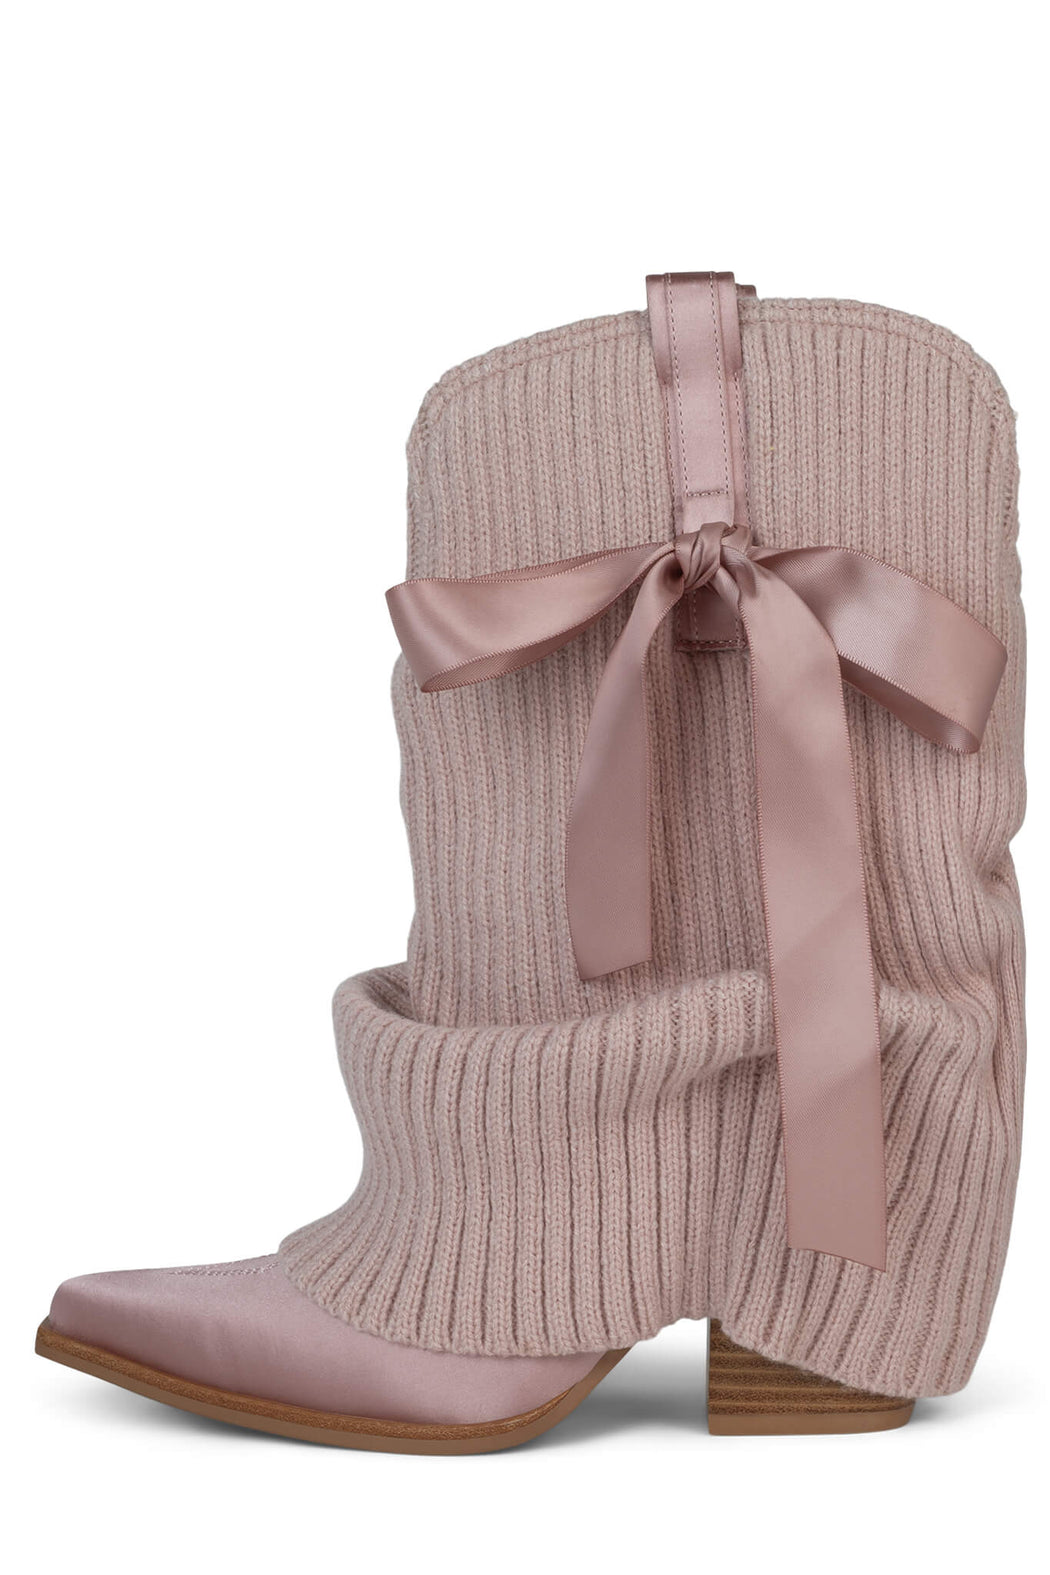 JC x FP x UL CENTER STAGE BOOT IN PINK